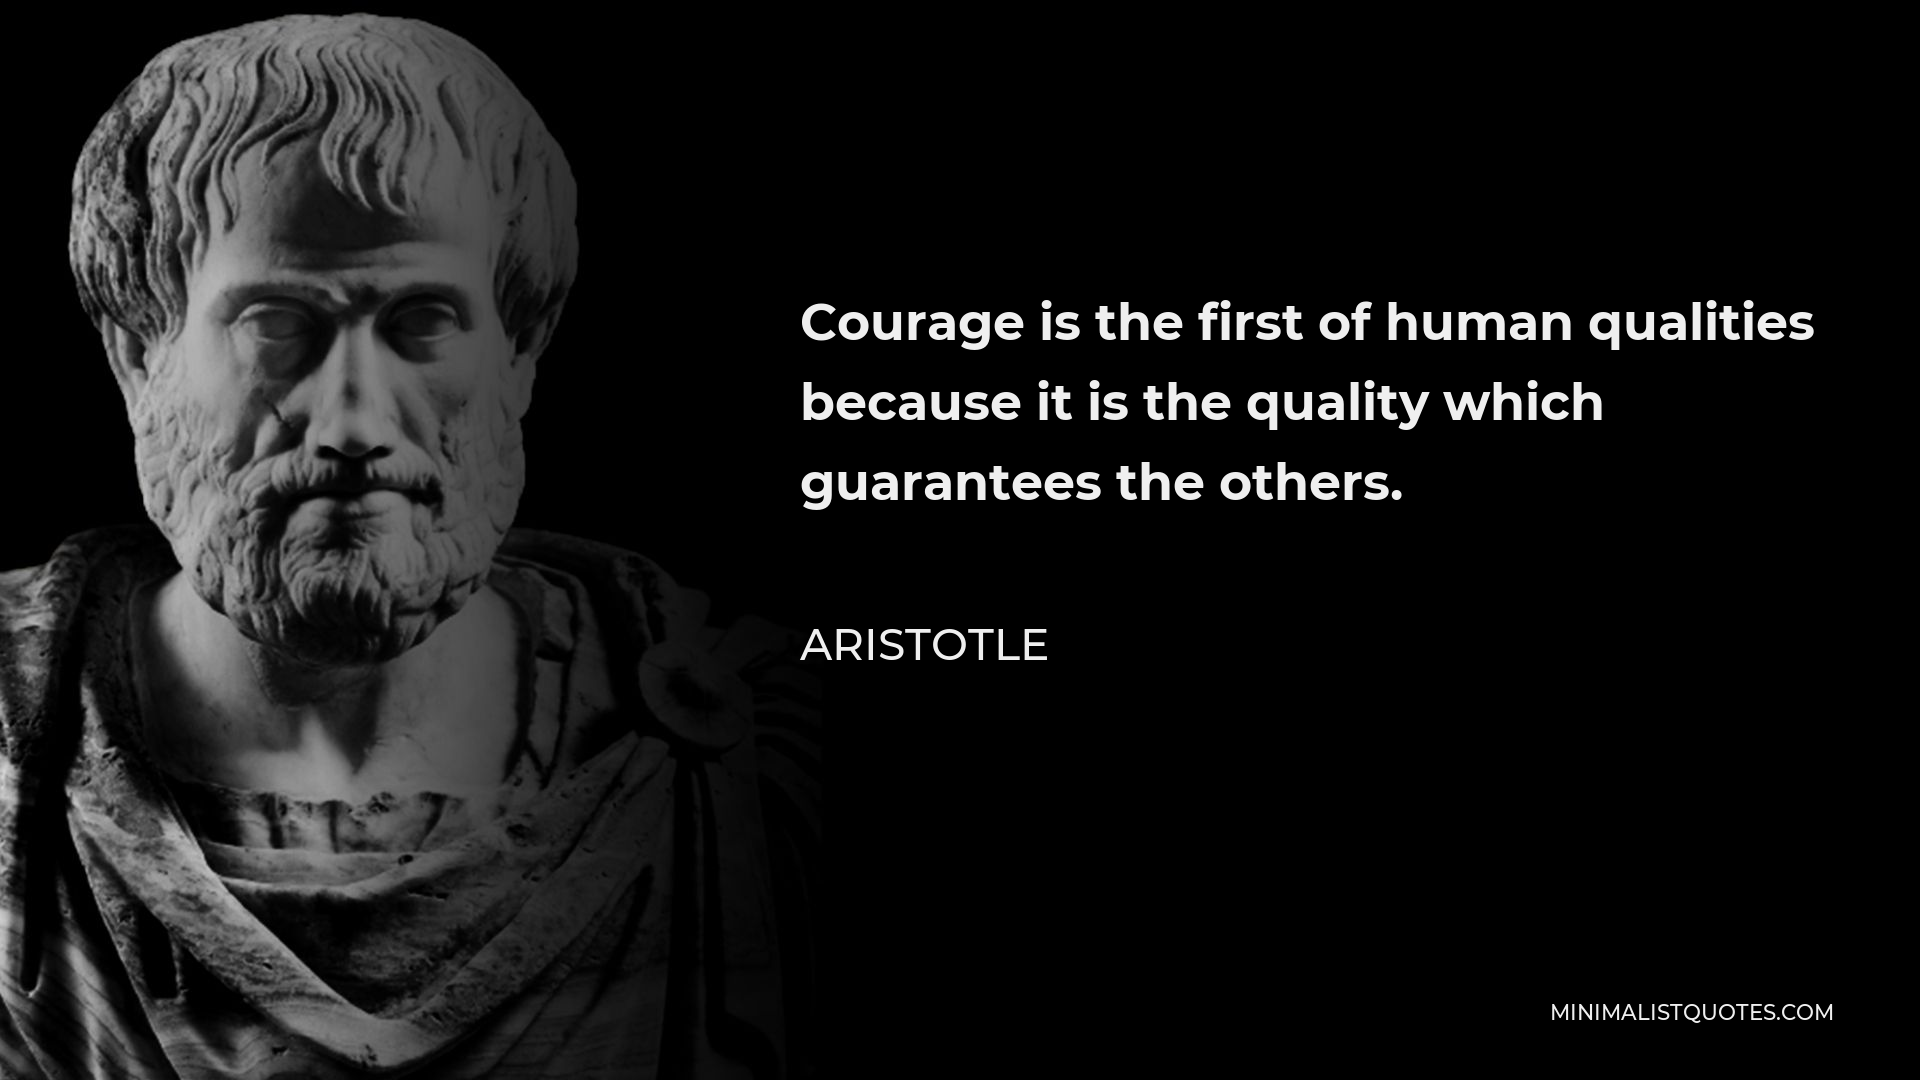 Aristotle Quote - Courage is the first of human qualities because it is the quality which guarantees the others.